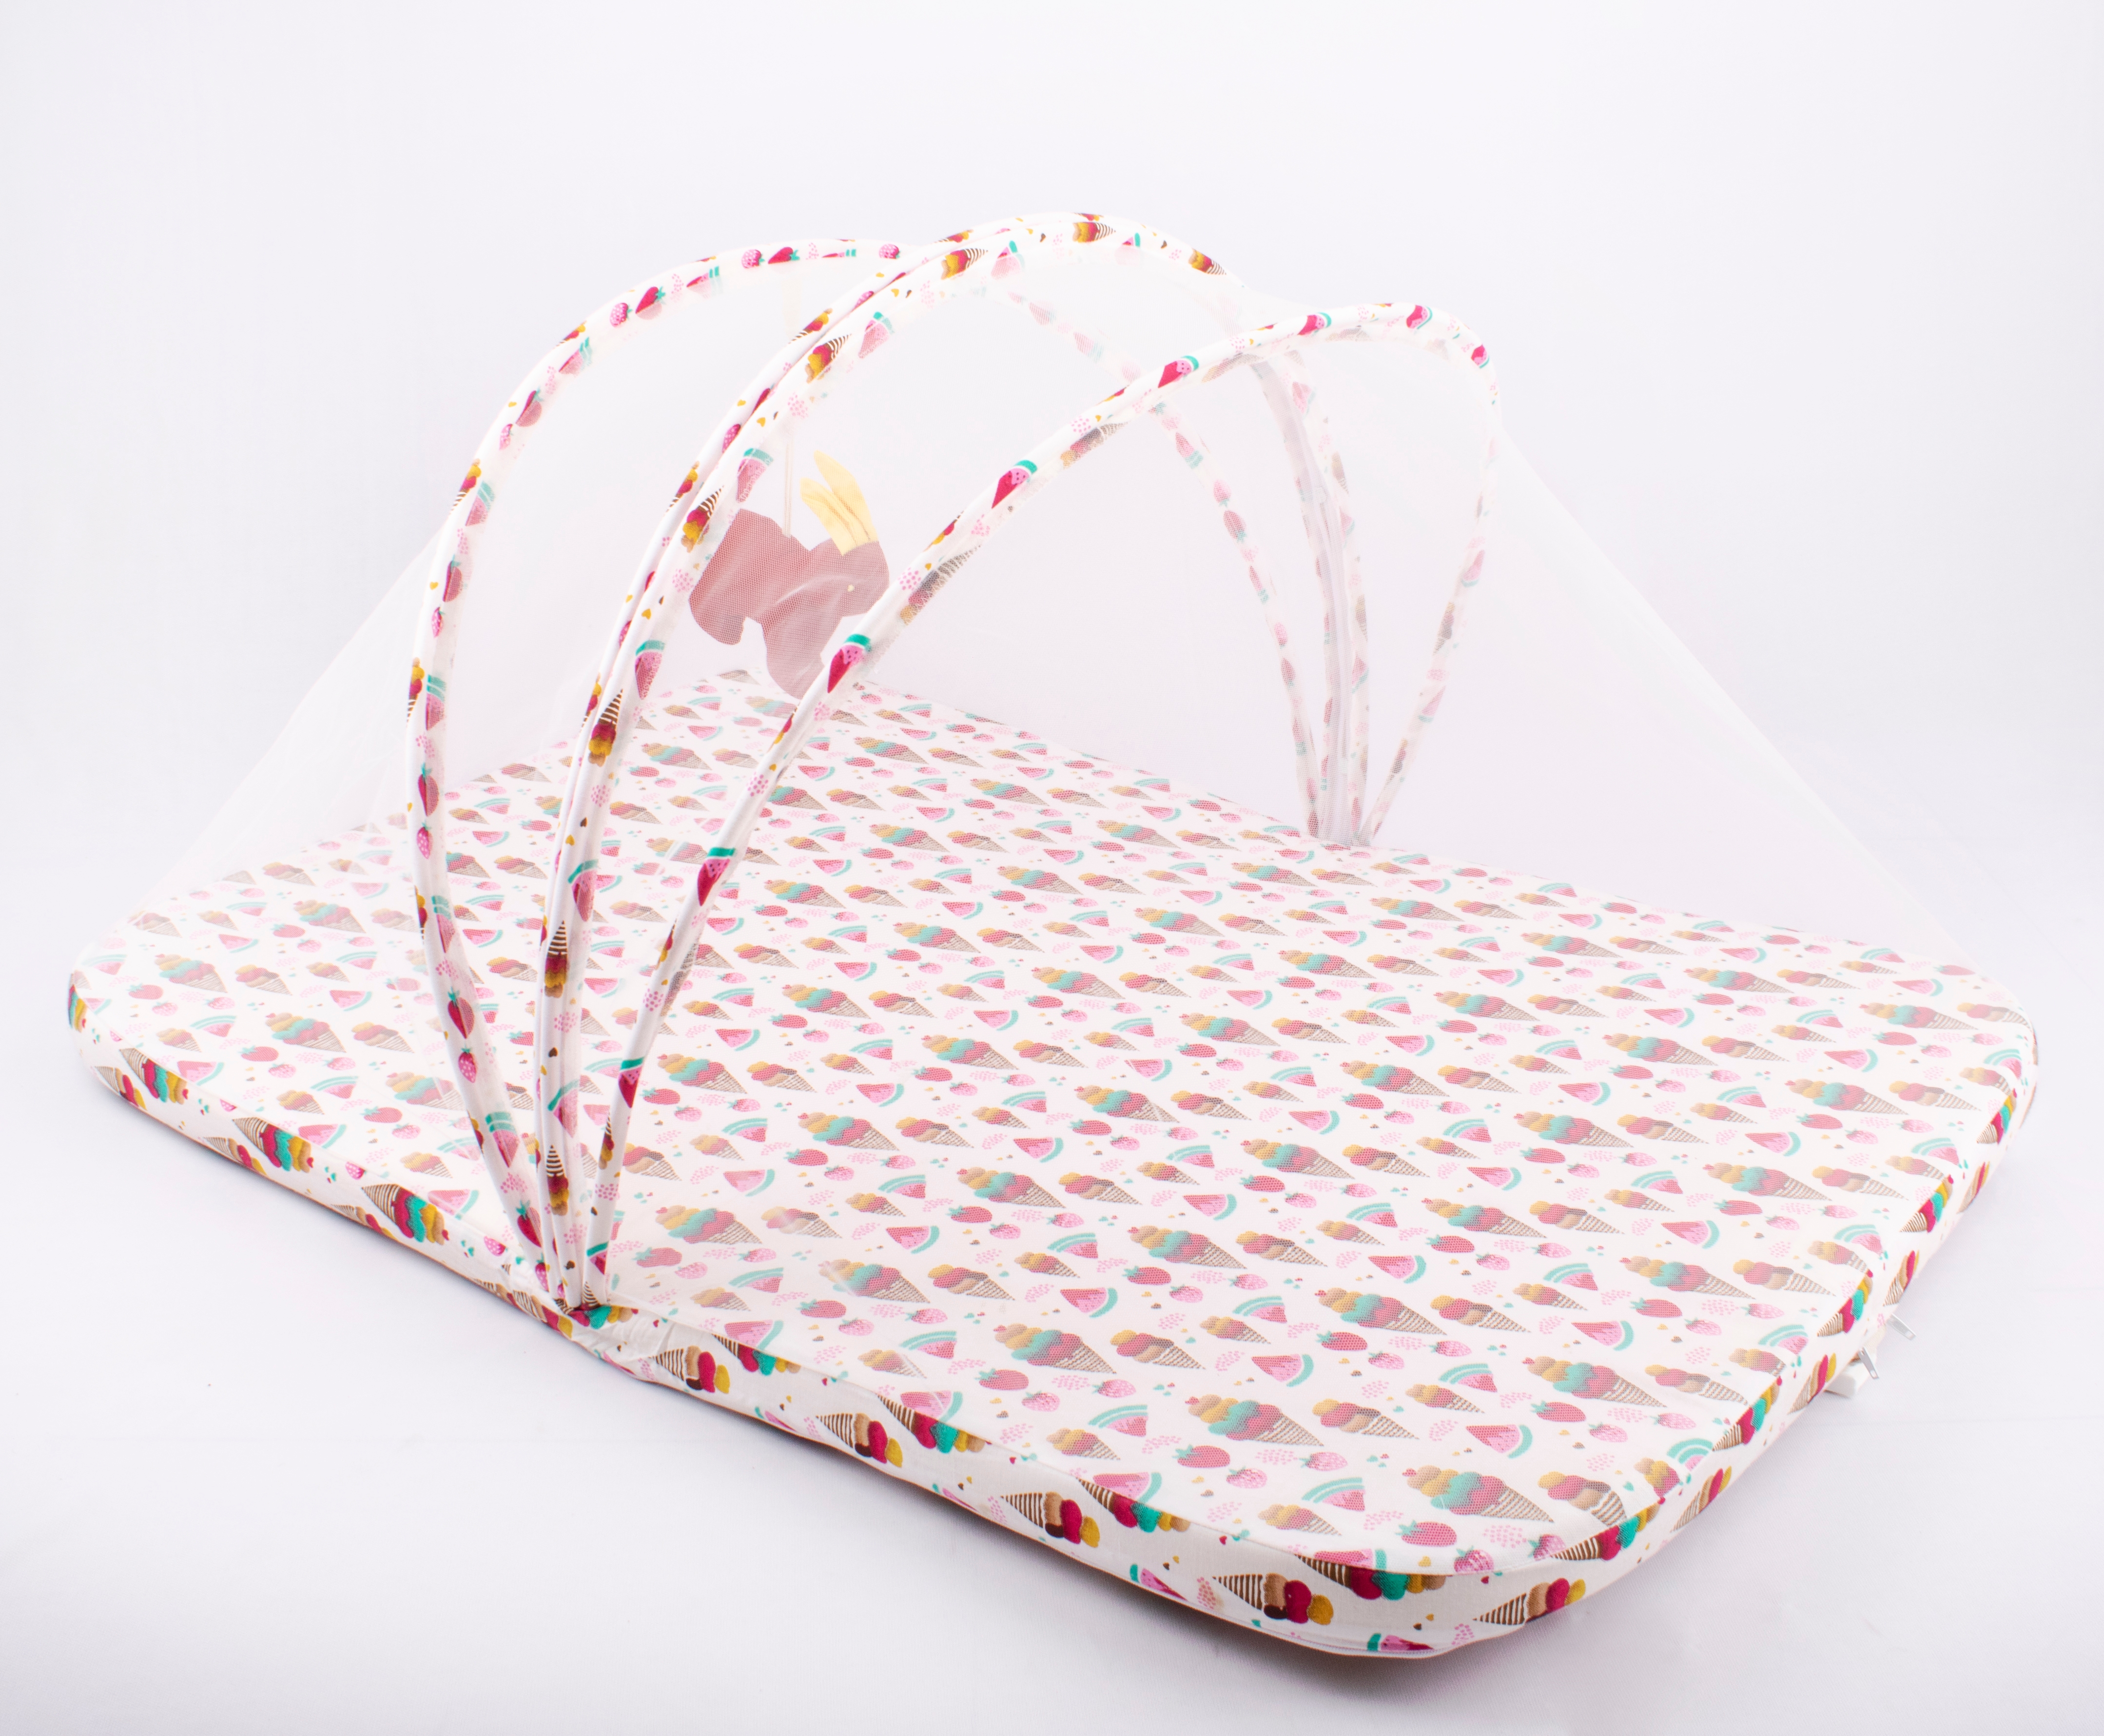 Blooming Buds | Blooming Buds Mattress with Net and Hanging Toy - Roses Print